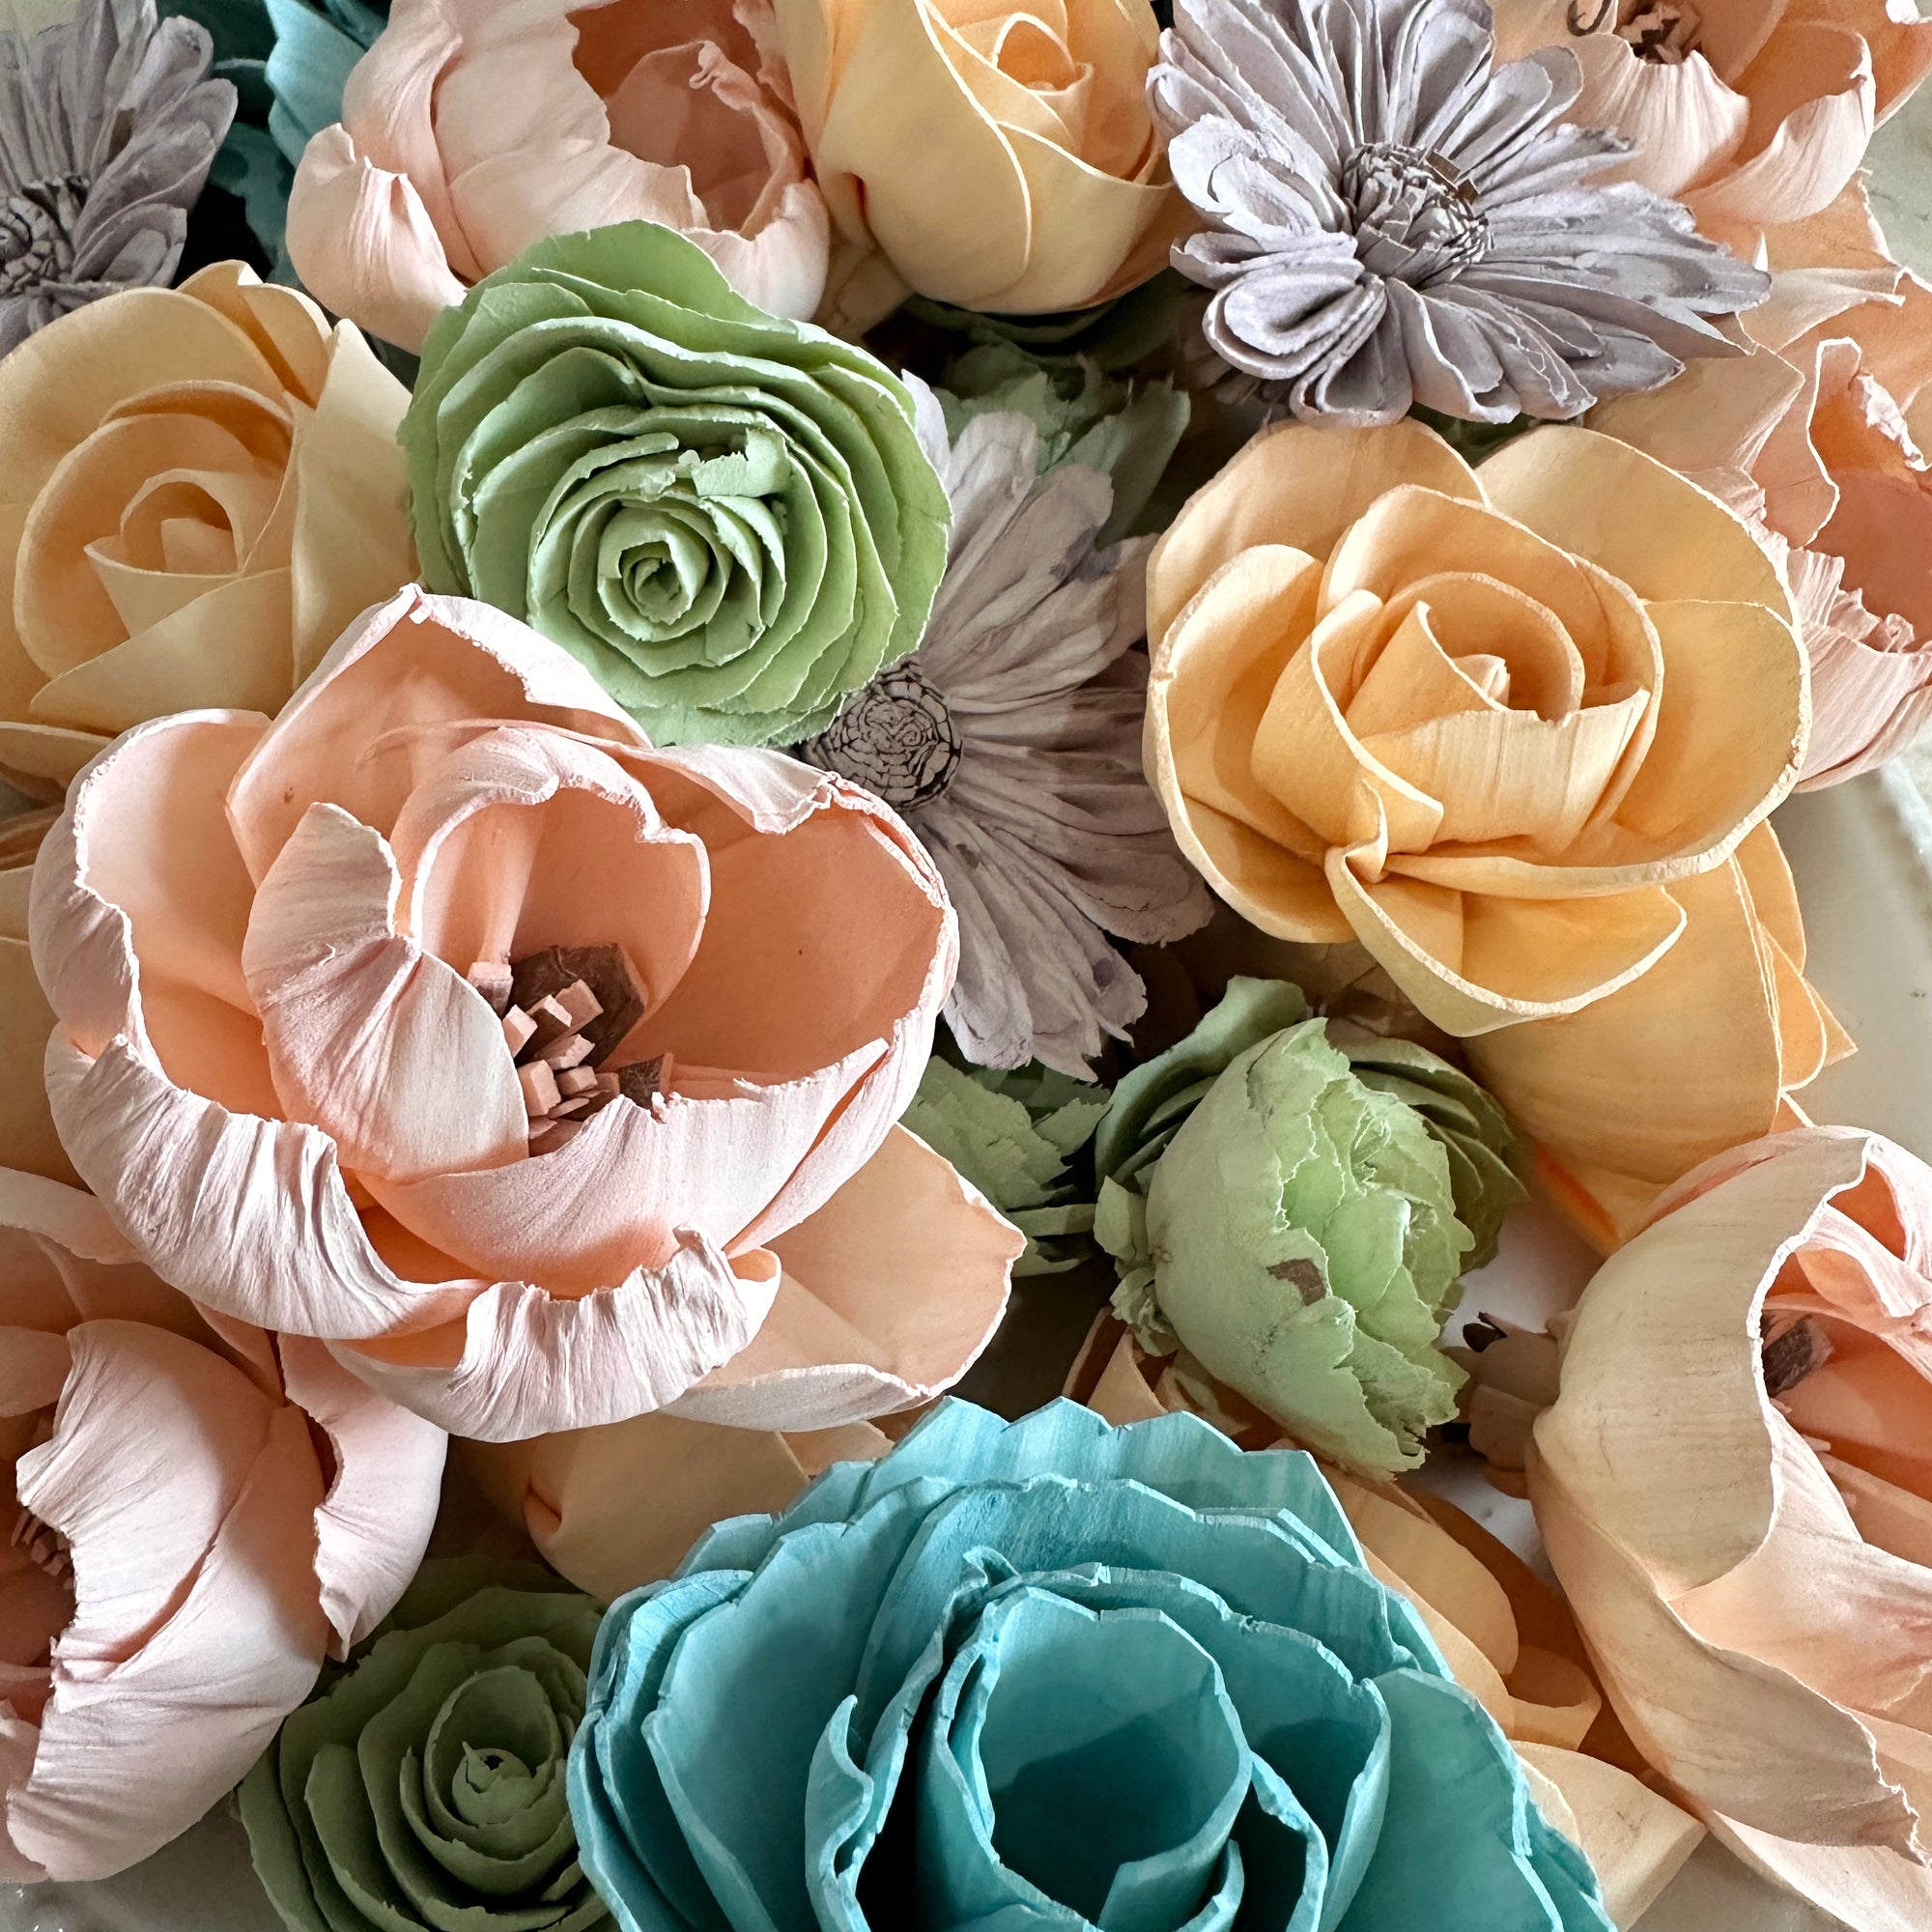 Pretty in Pastels- dyed sola wood flower assortment